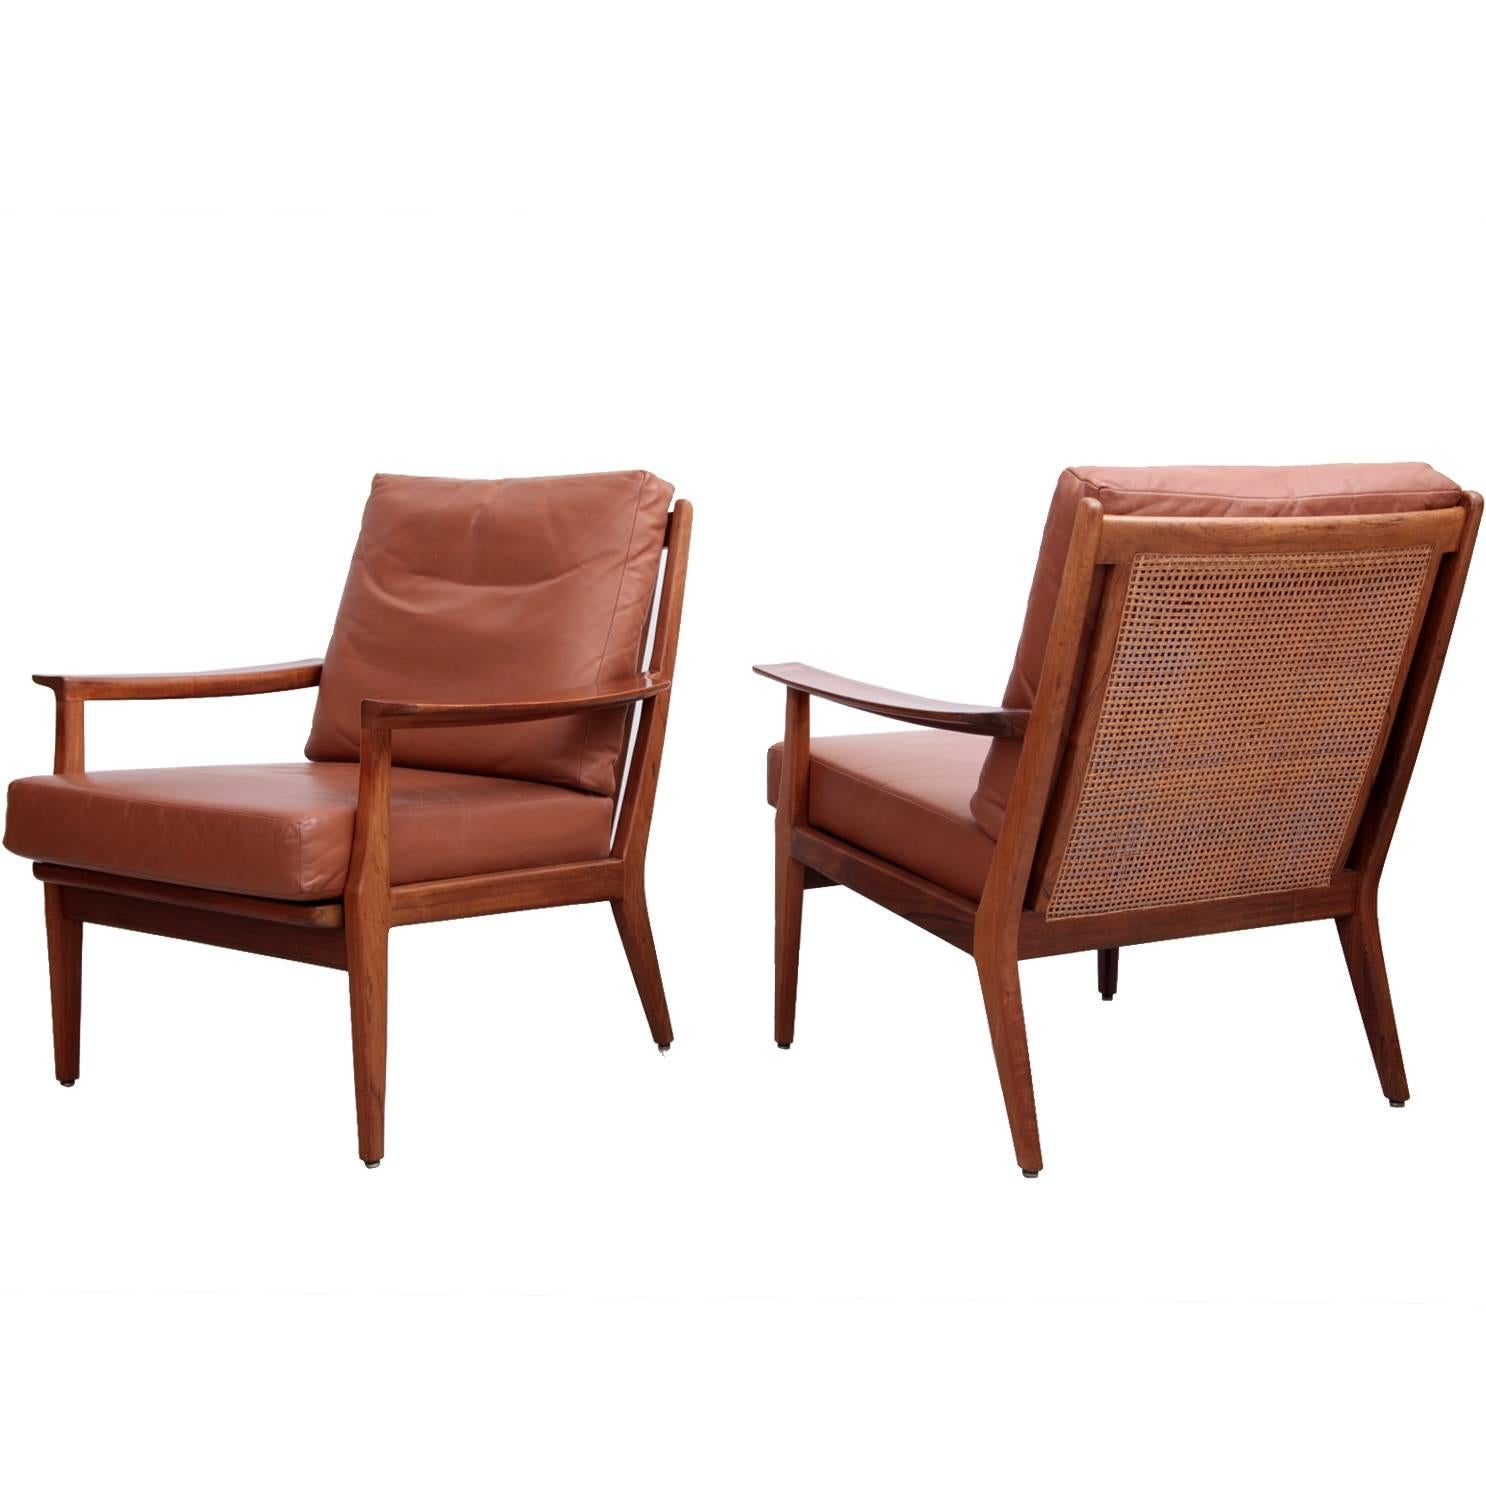 Pair of Danish Wood Lounge Chairs in Leather and Cane